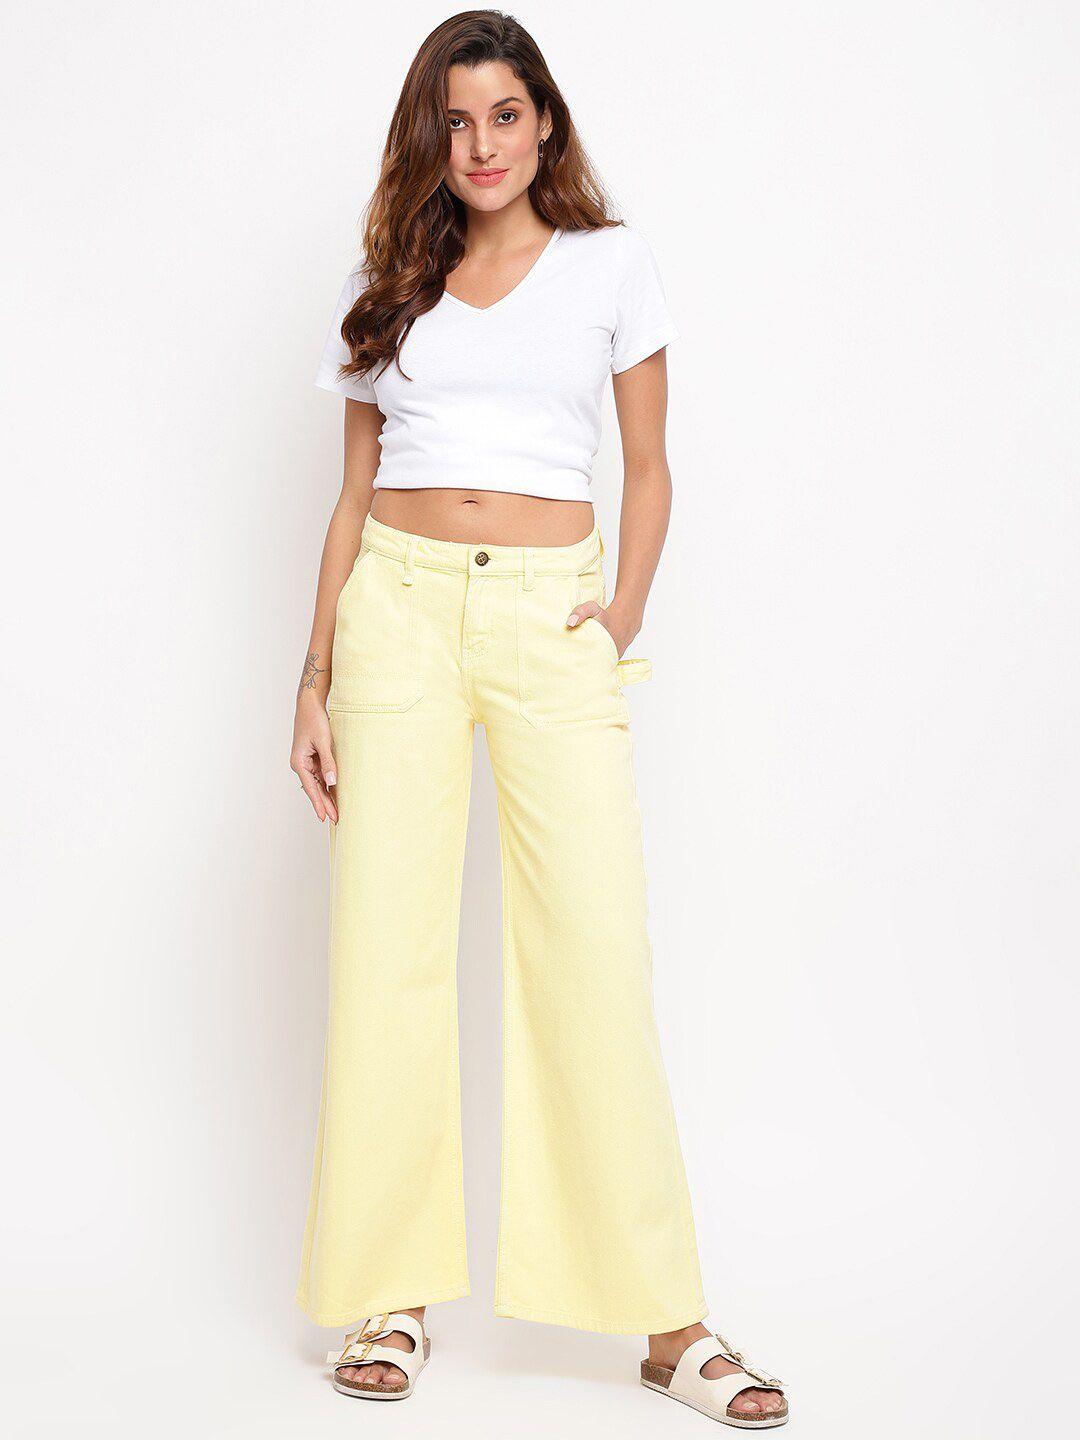 tales & stories women yellow wide leg stretchable jeans